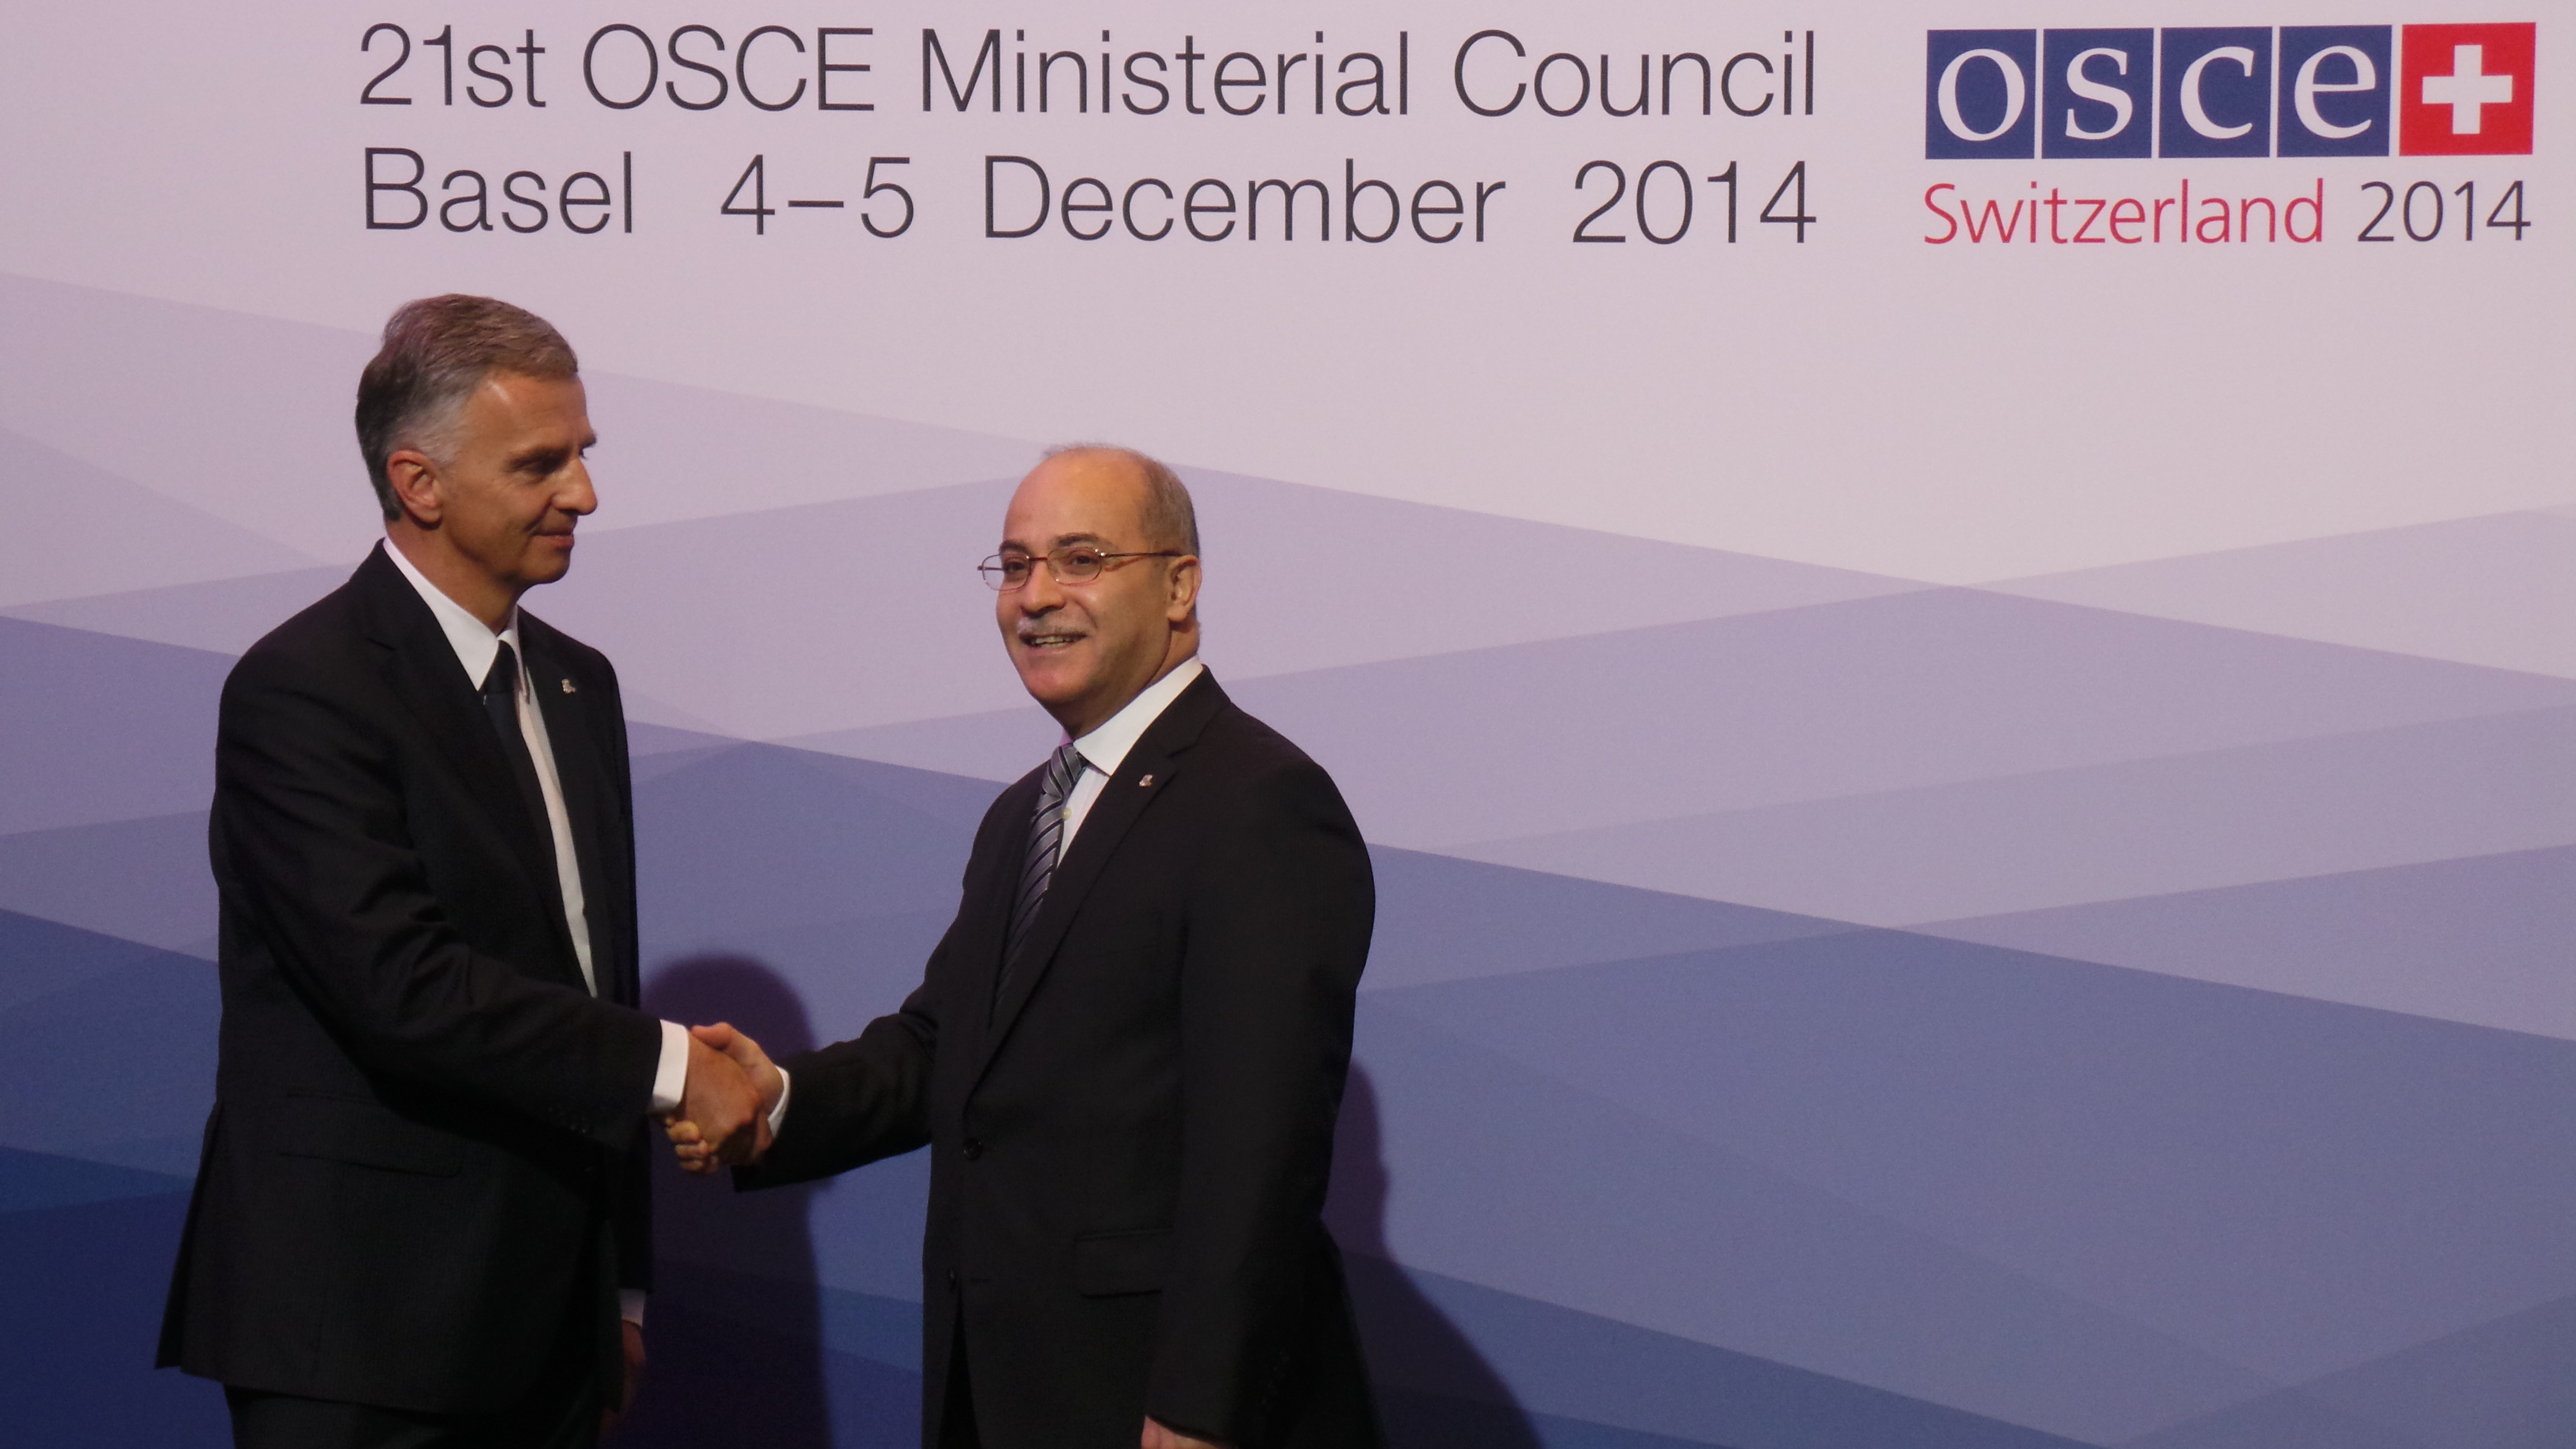 The President of the Swiss Confederation, Didier Burkhalter, greets Hussam Al Husseini, Permanent Representative to the OSCE in Jordan at the OSCE Ministerial Council 2014 in Basel